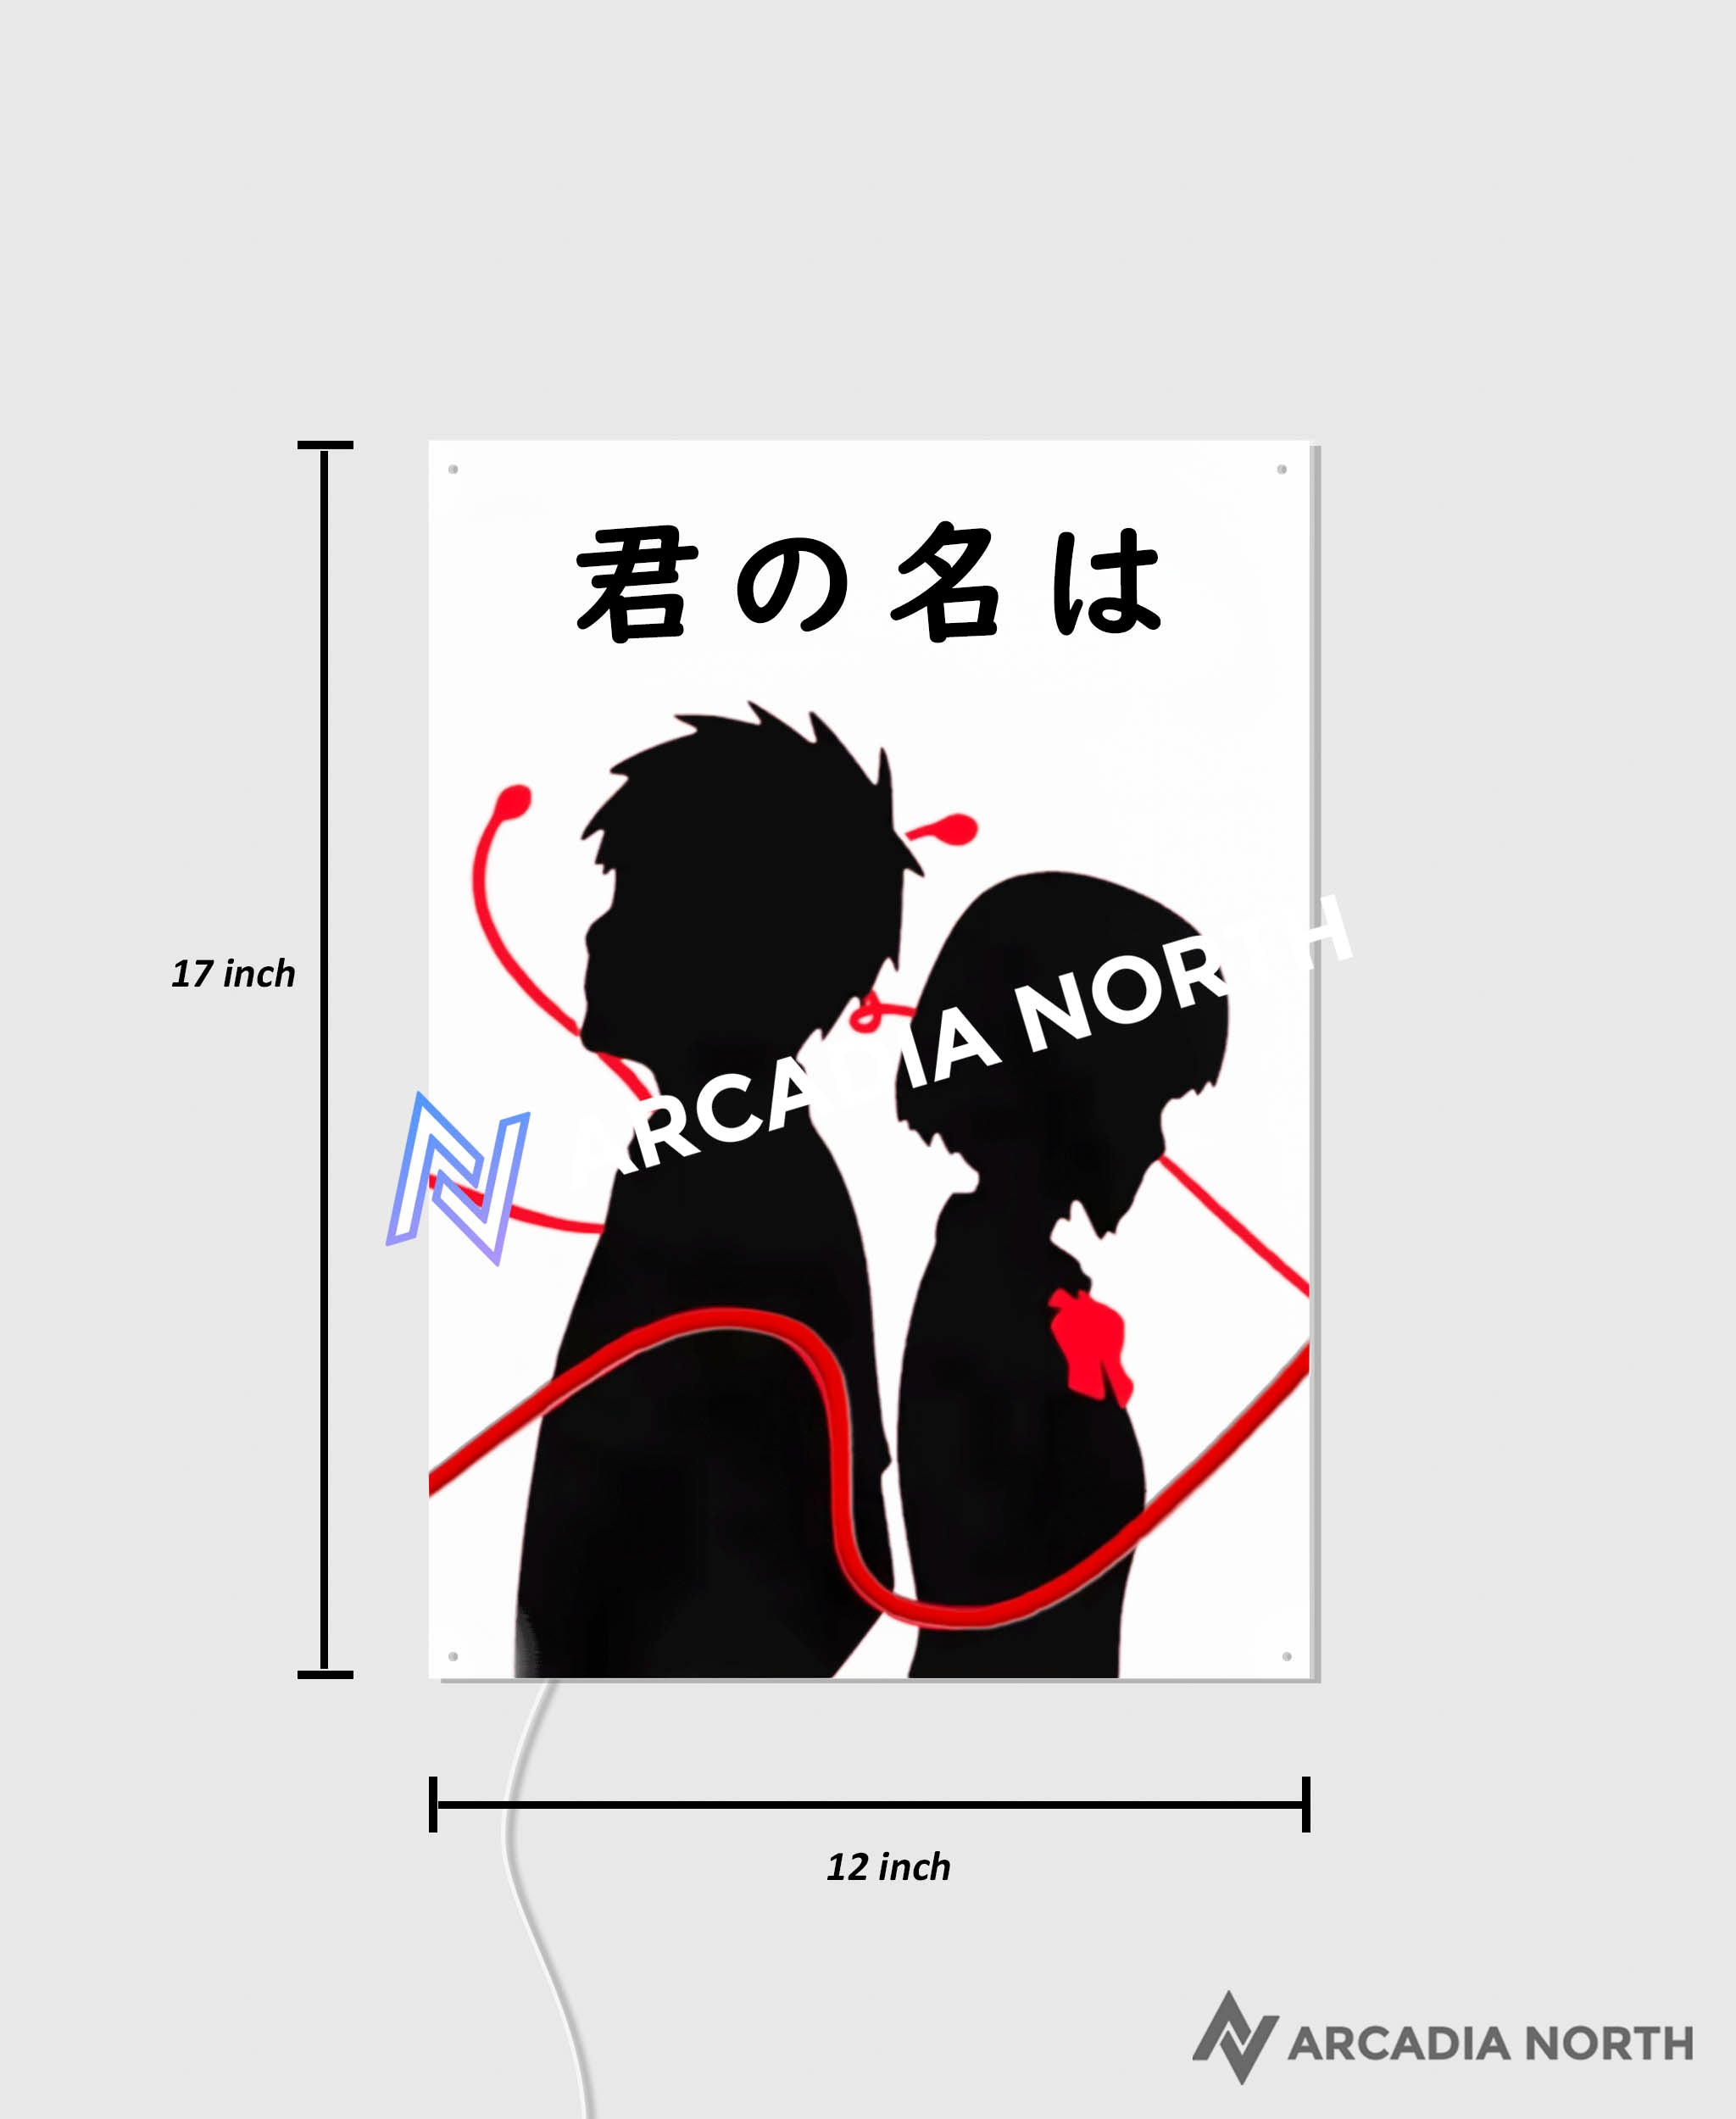 Arcadia North AURALIGHT Original LED Poster featuring the Makoto Shinkai anime Your Name Kimi no Na wa with Mitsuha and Taki connected by the red string of fate. Illuminated by glowing neon LED lights. UV-printed on acrylic.